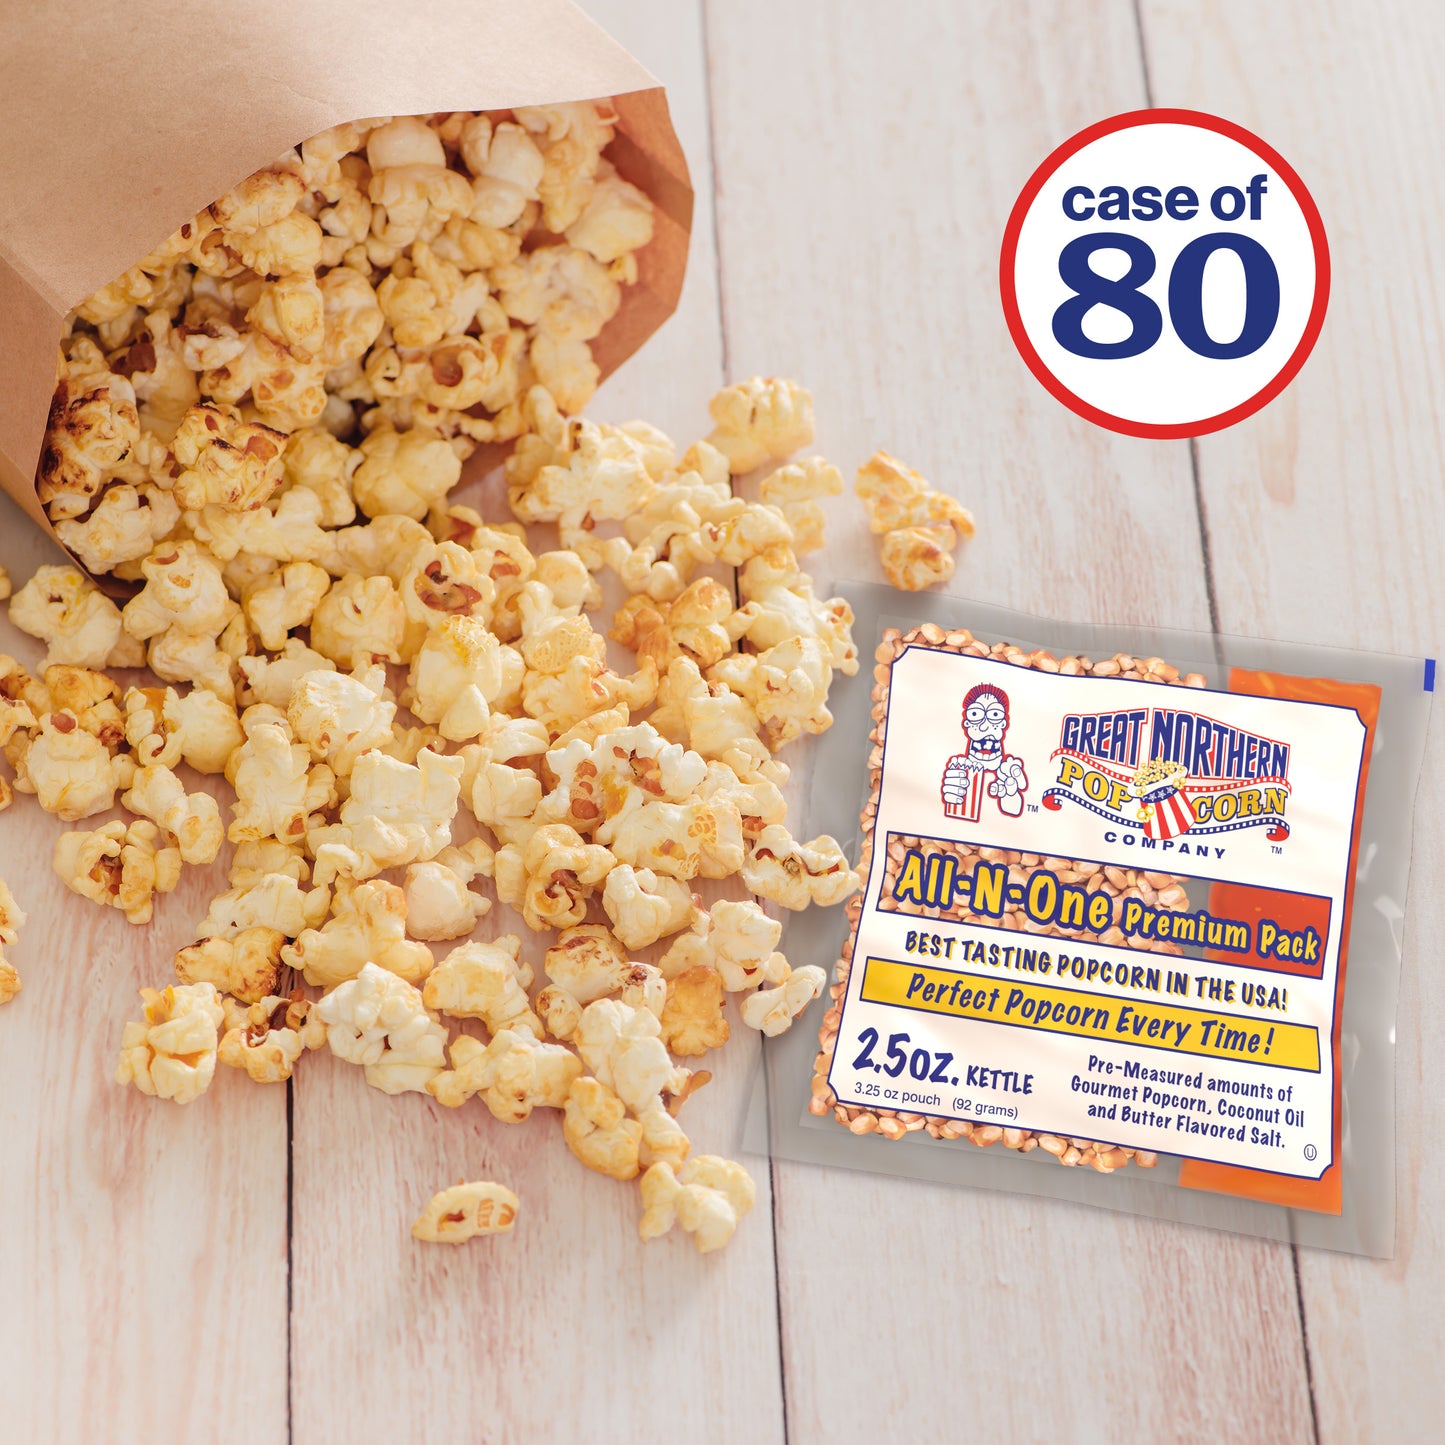 2.5 Ounce Popcorn, Salt and Oil All-in-One Packets - Case of 80